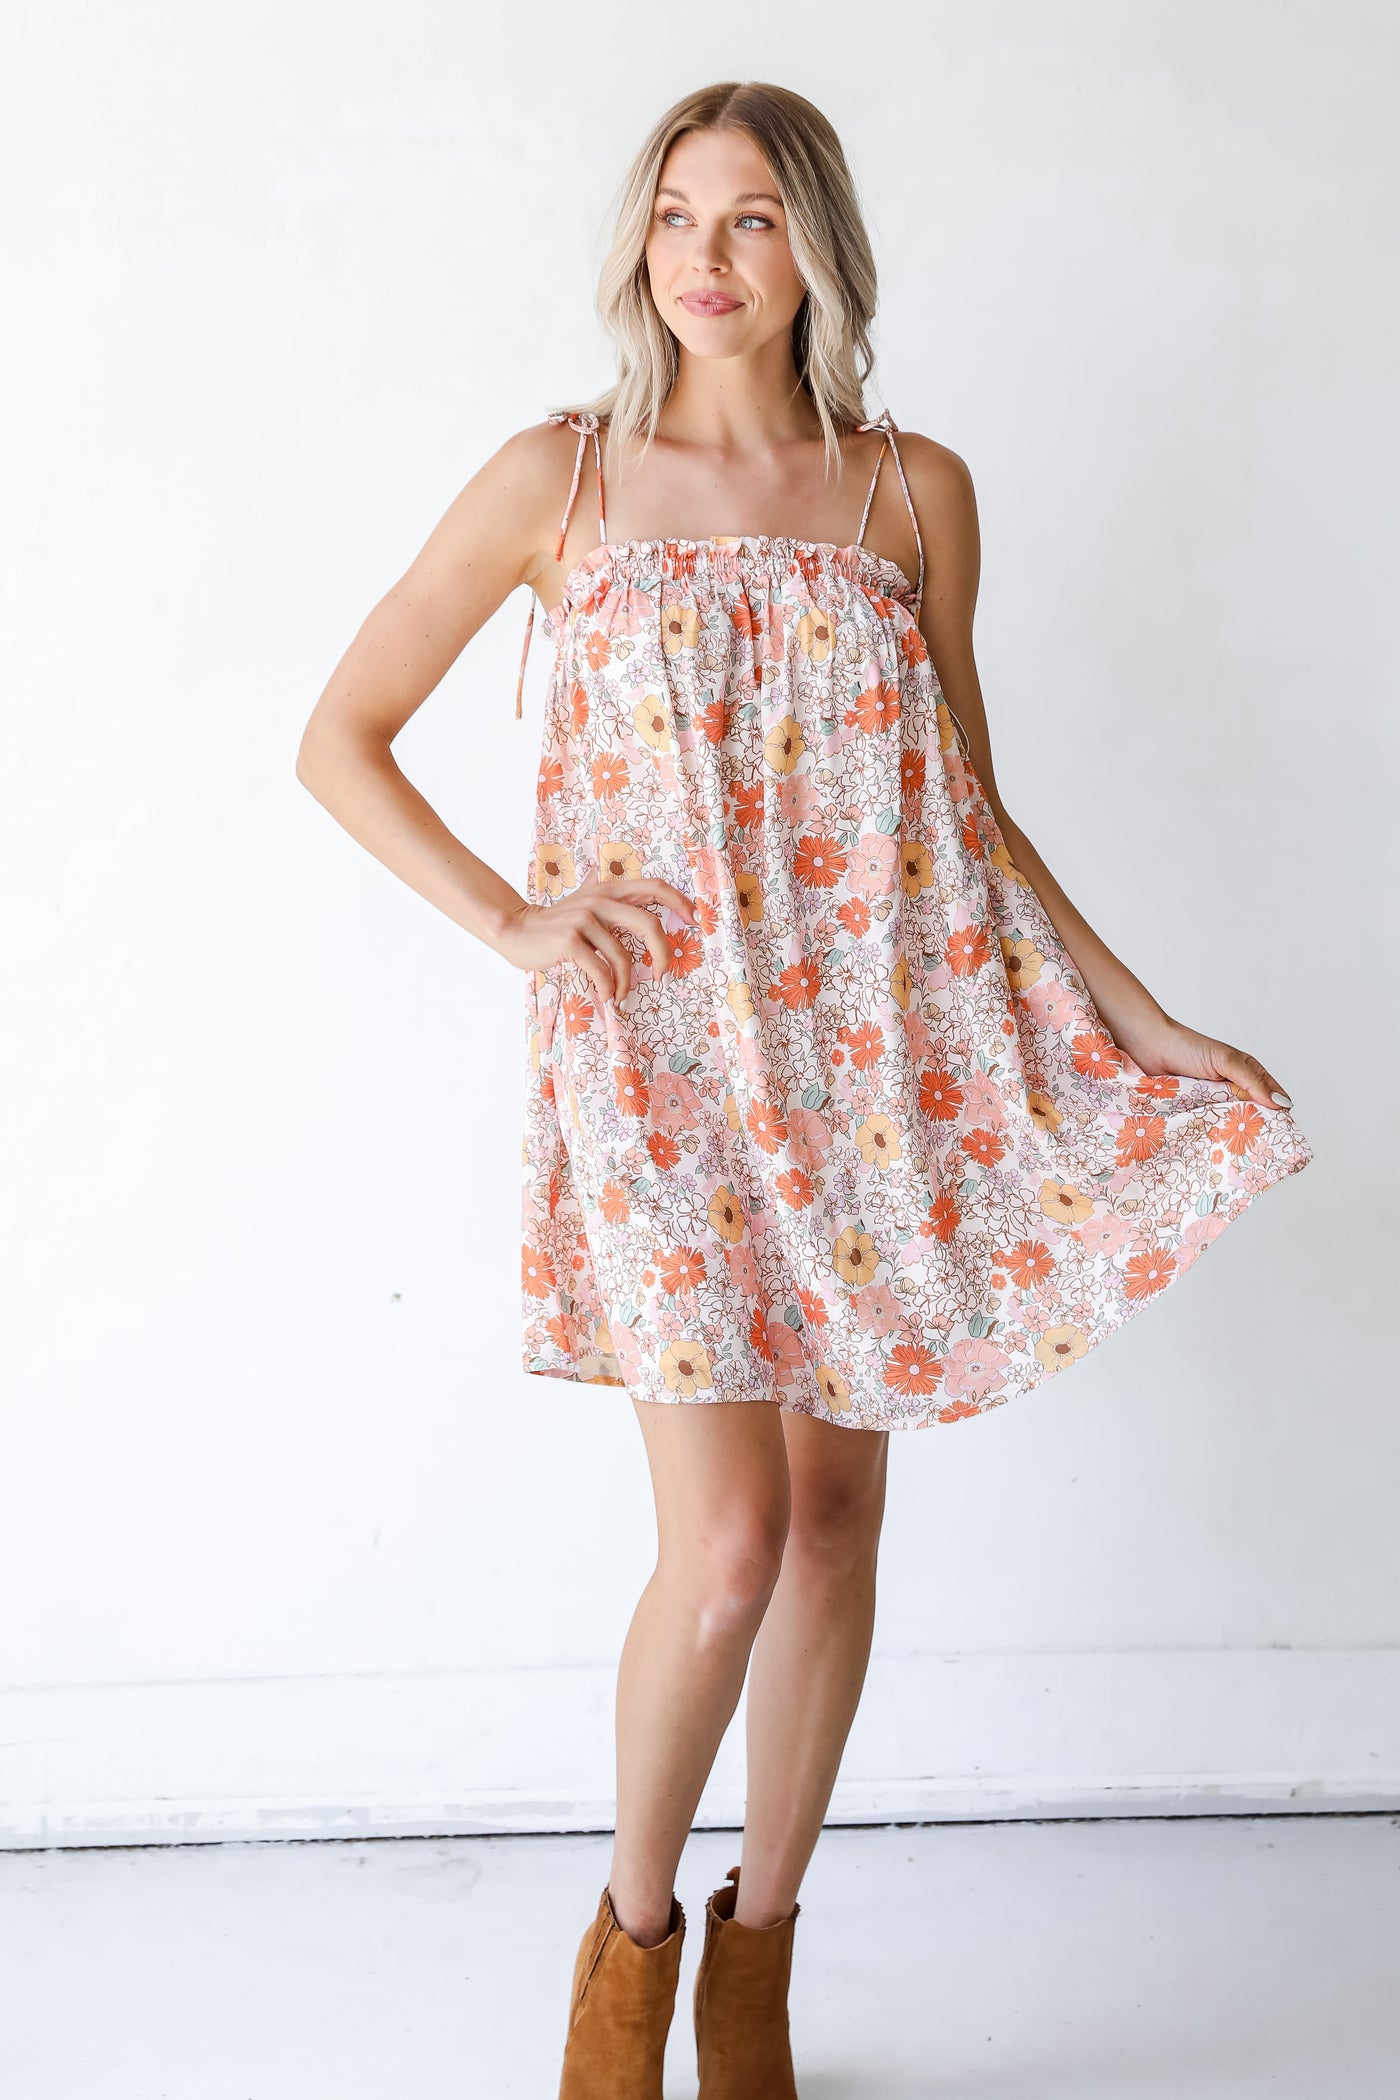 model wearing a Floral Mini Dress with tan booties